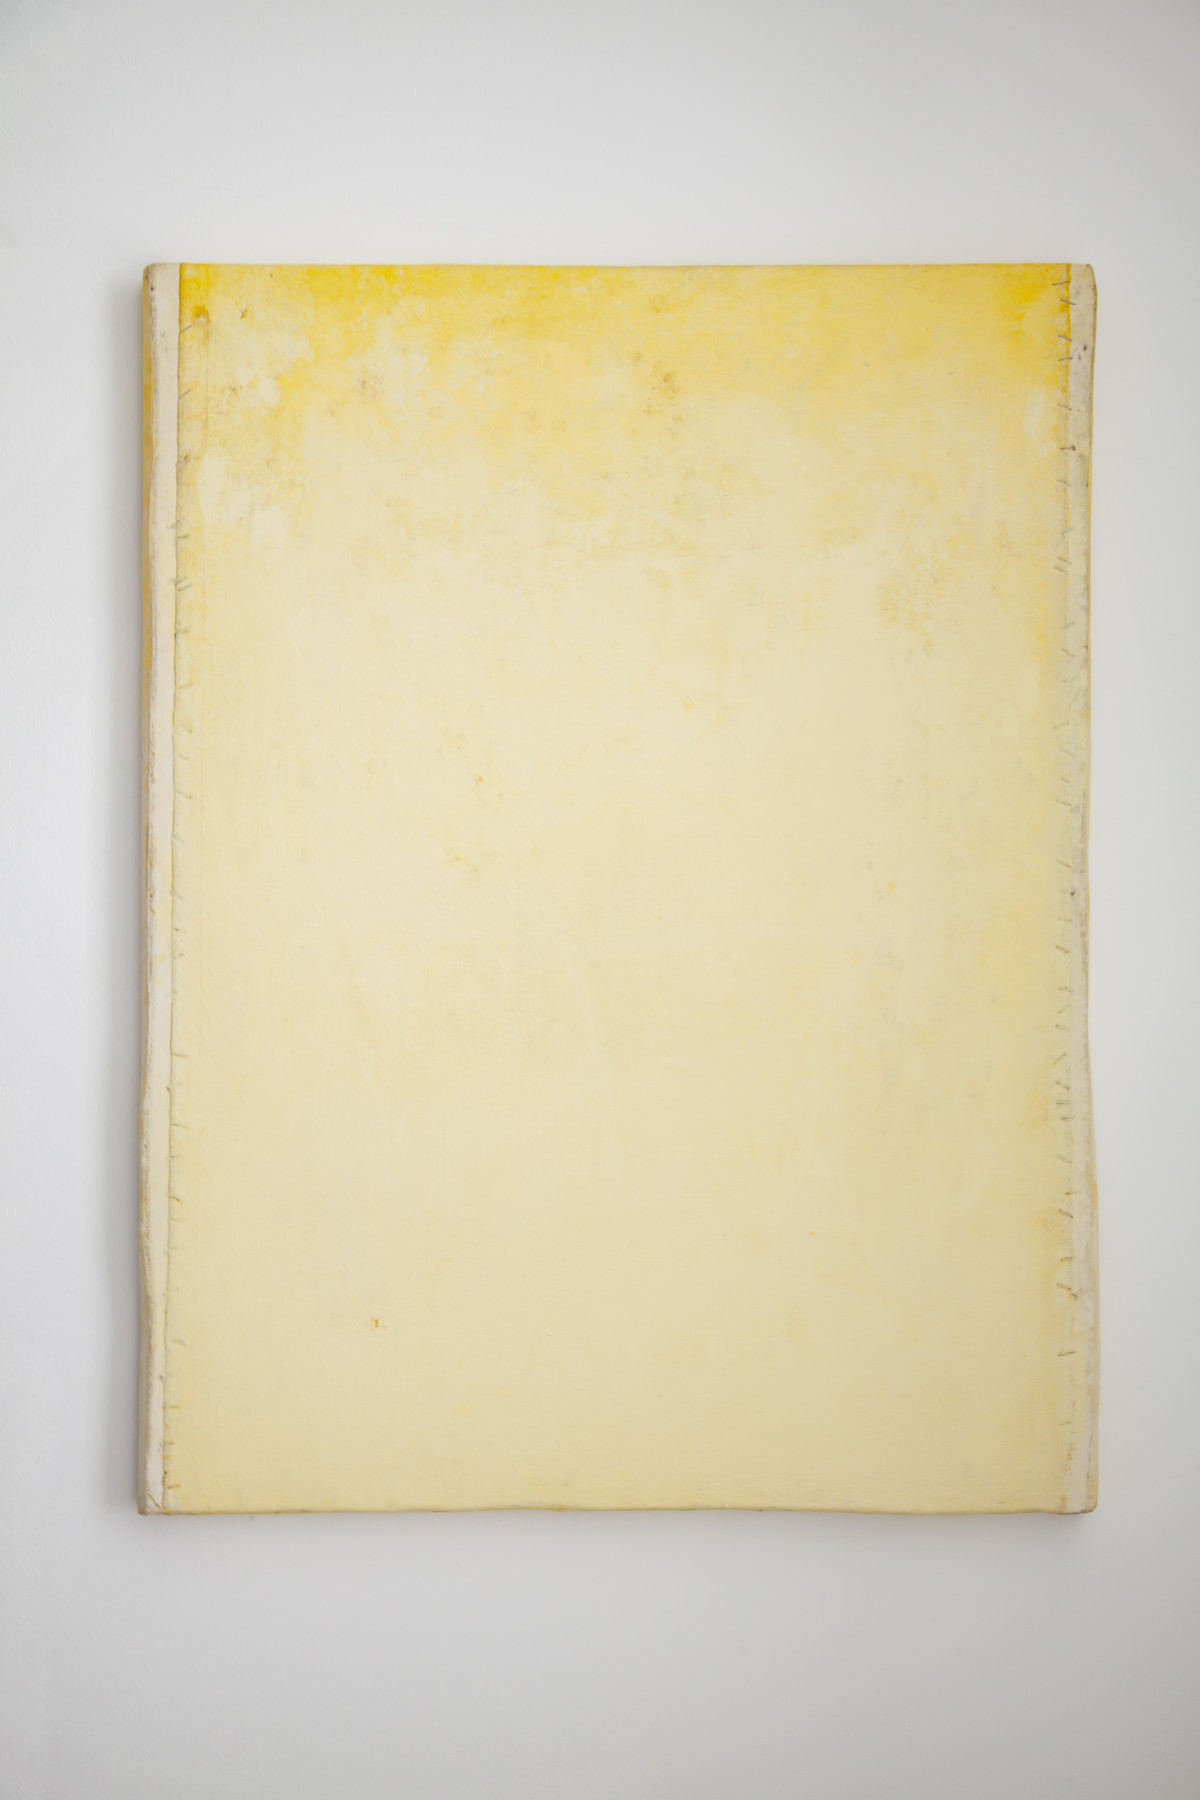 Lawrence Carroll, ‘Untitled (Yellow Painting)’, 2012-2015, oil, wax on canvas on wood